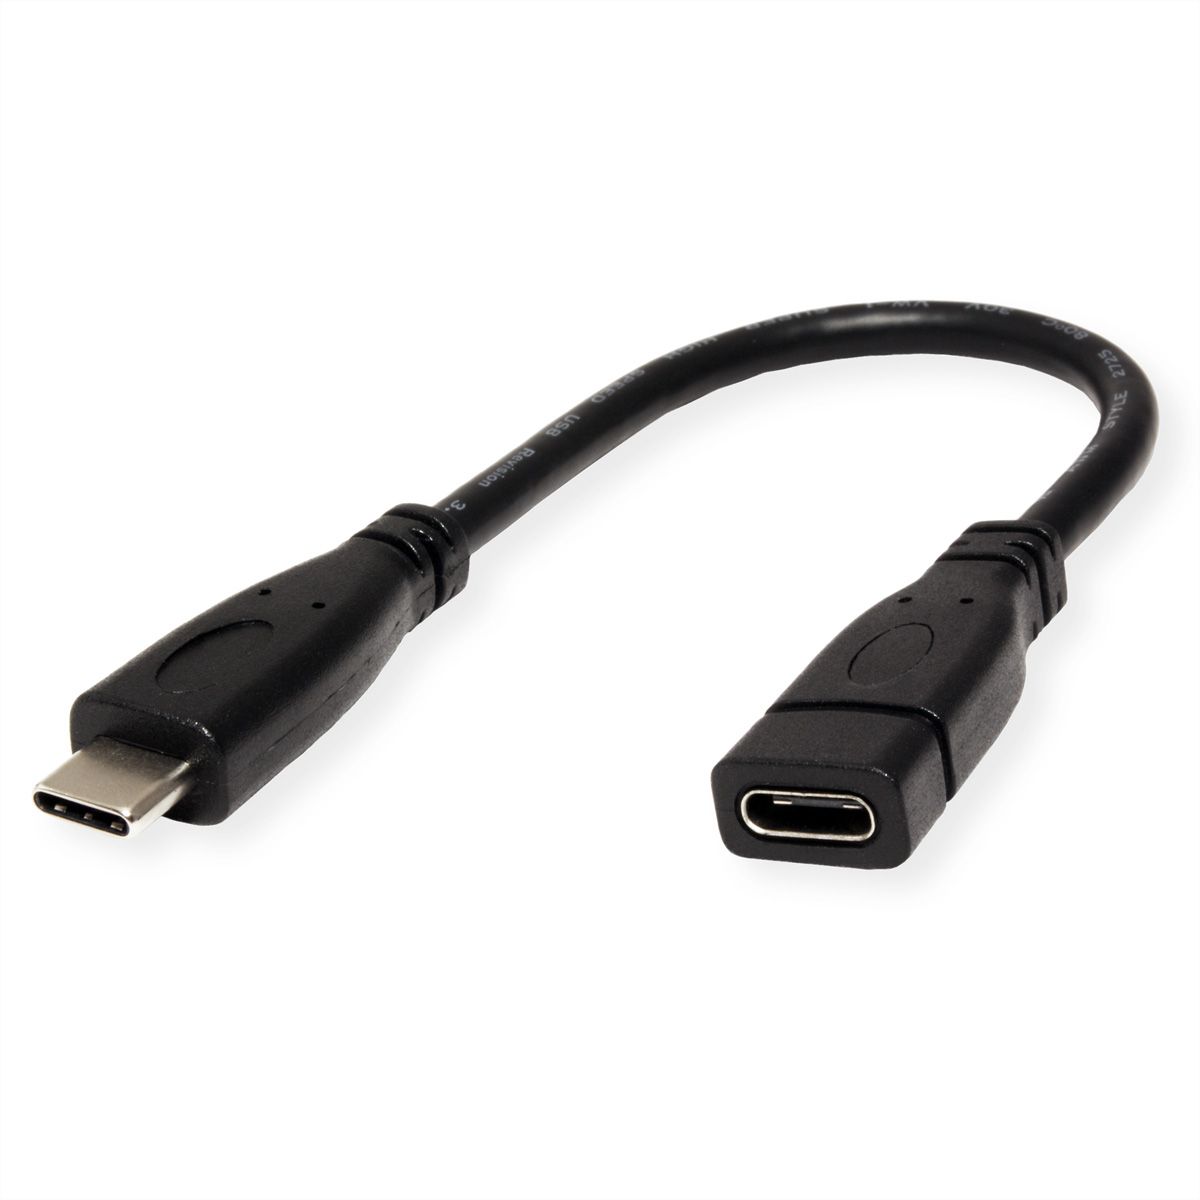 CableMax USB Type C 3FT Male to Male Black USB 3.1 Gen1 Cable USB-C